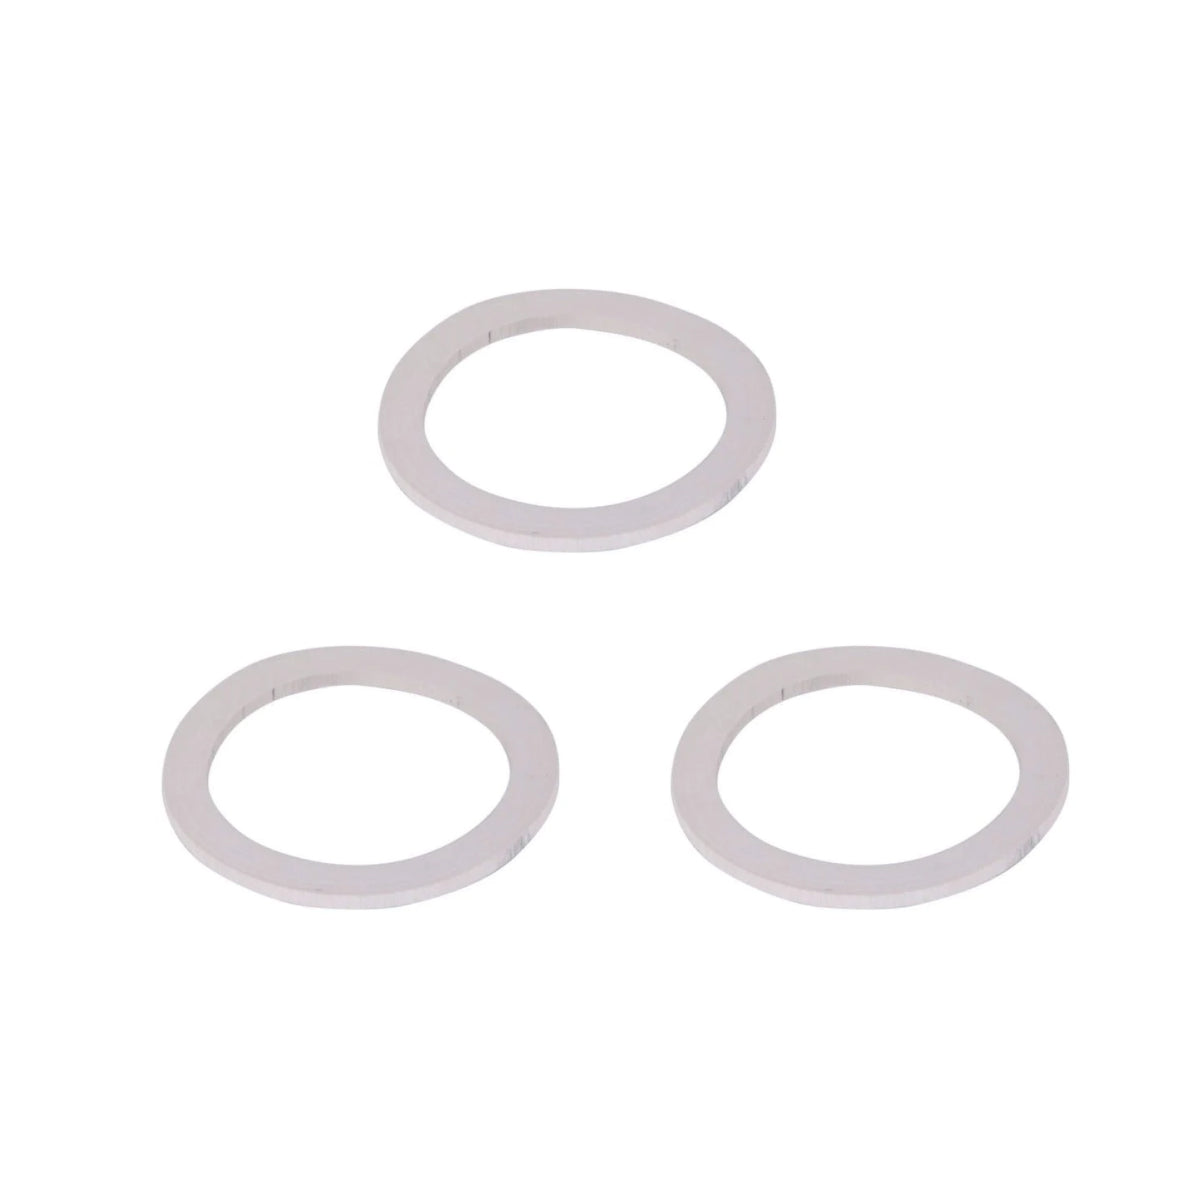 Ilsa Omnia Replacement Gaskets - Set of 3